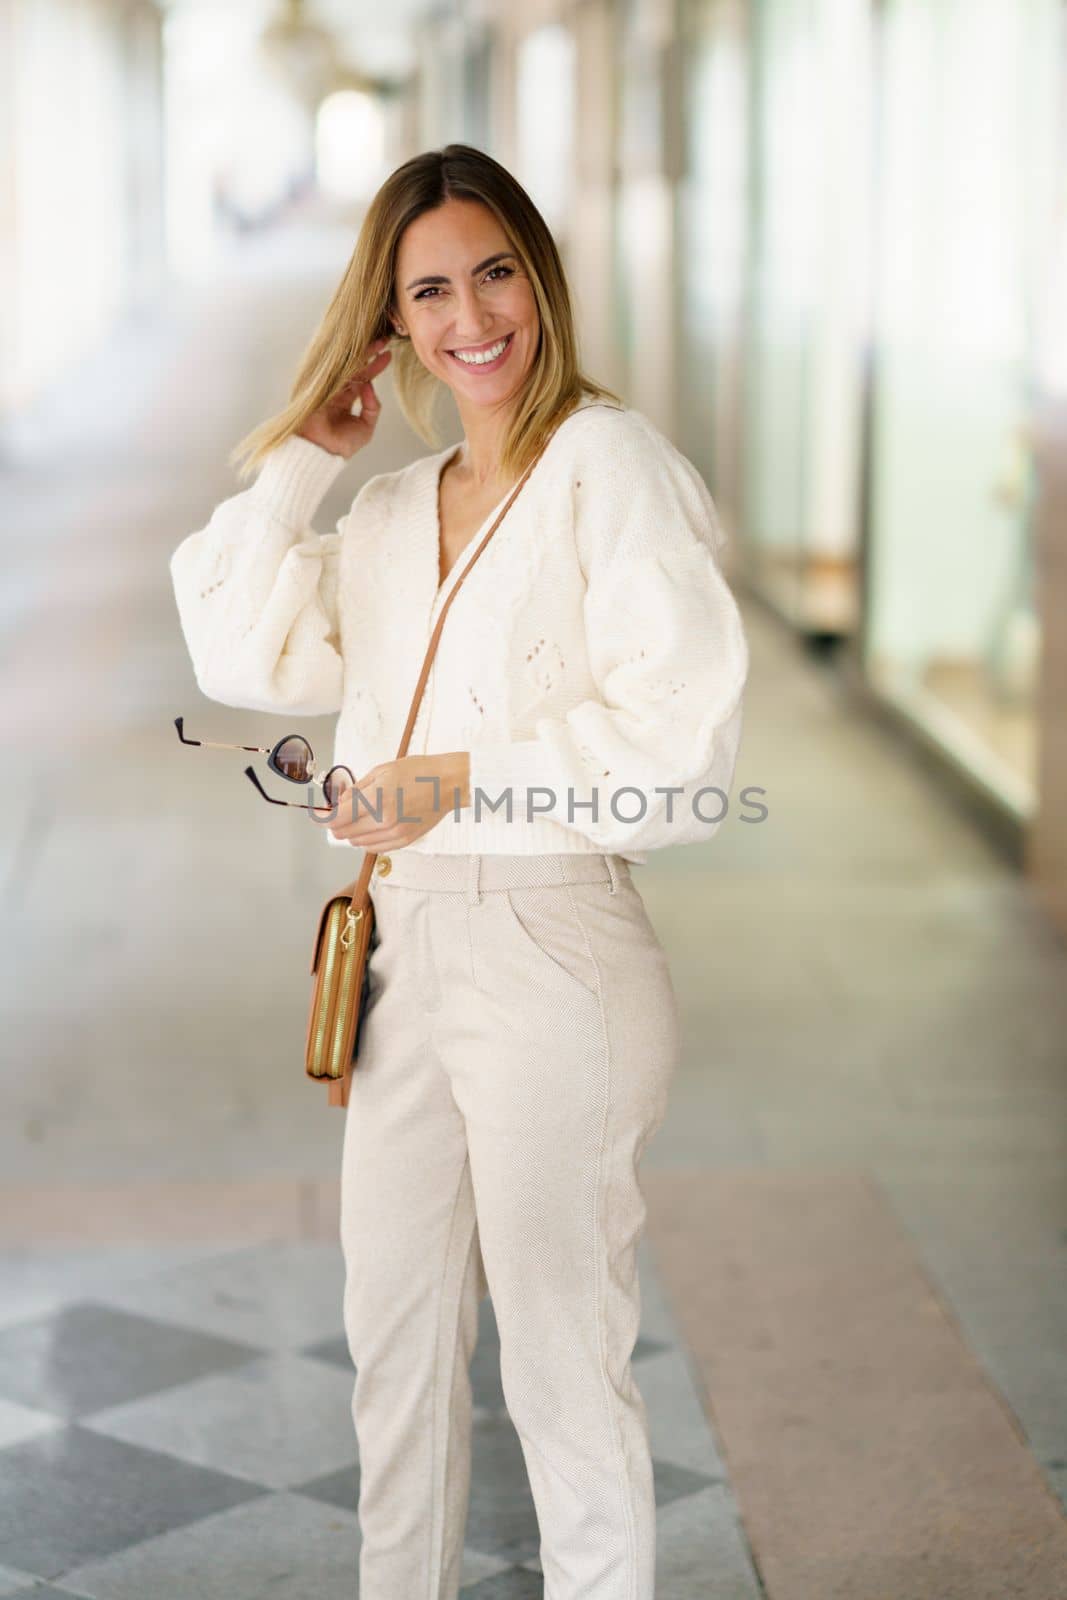 Smiling woman with sunglasses in beige outfit by javiindy